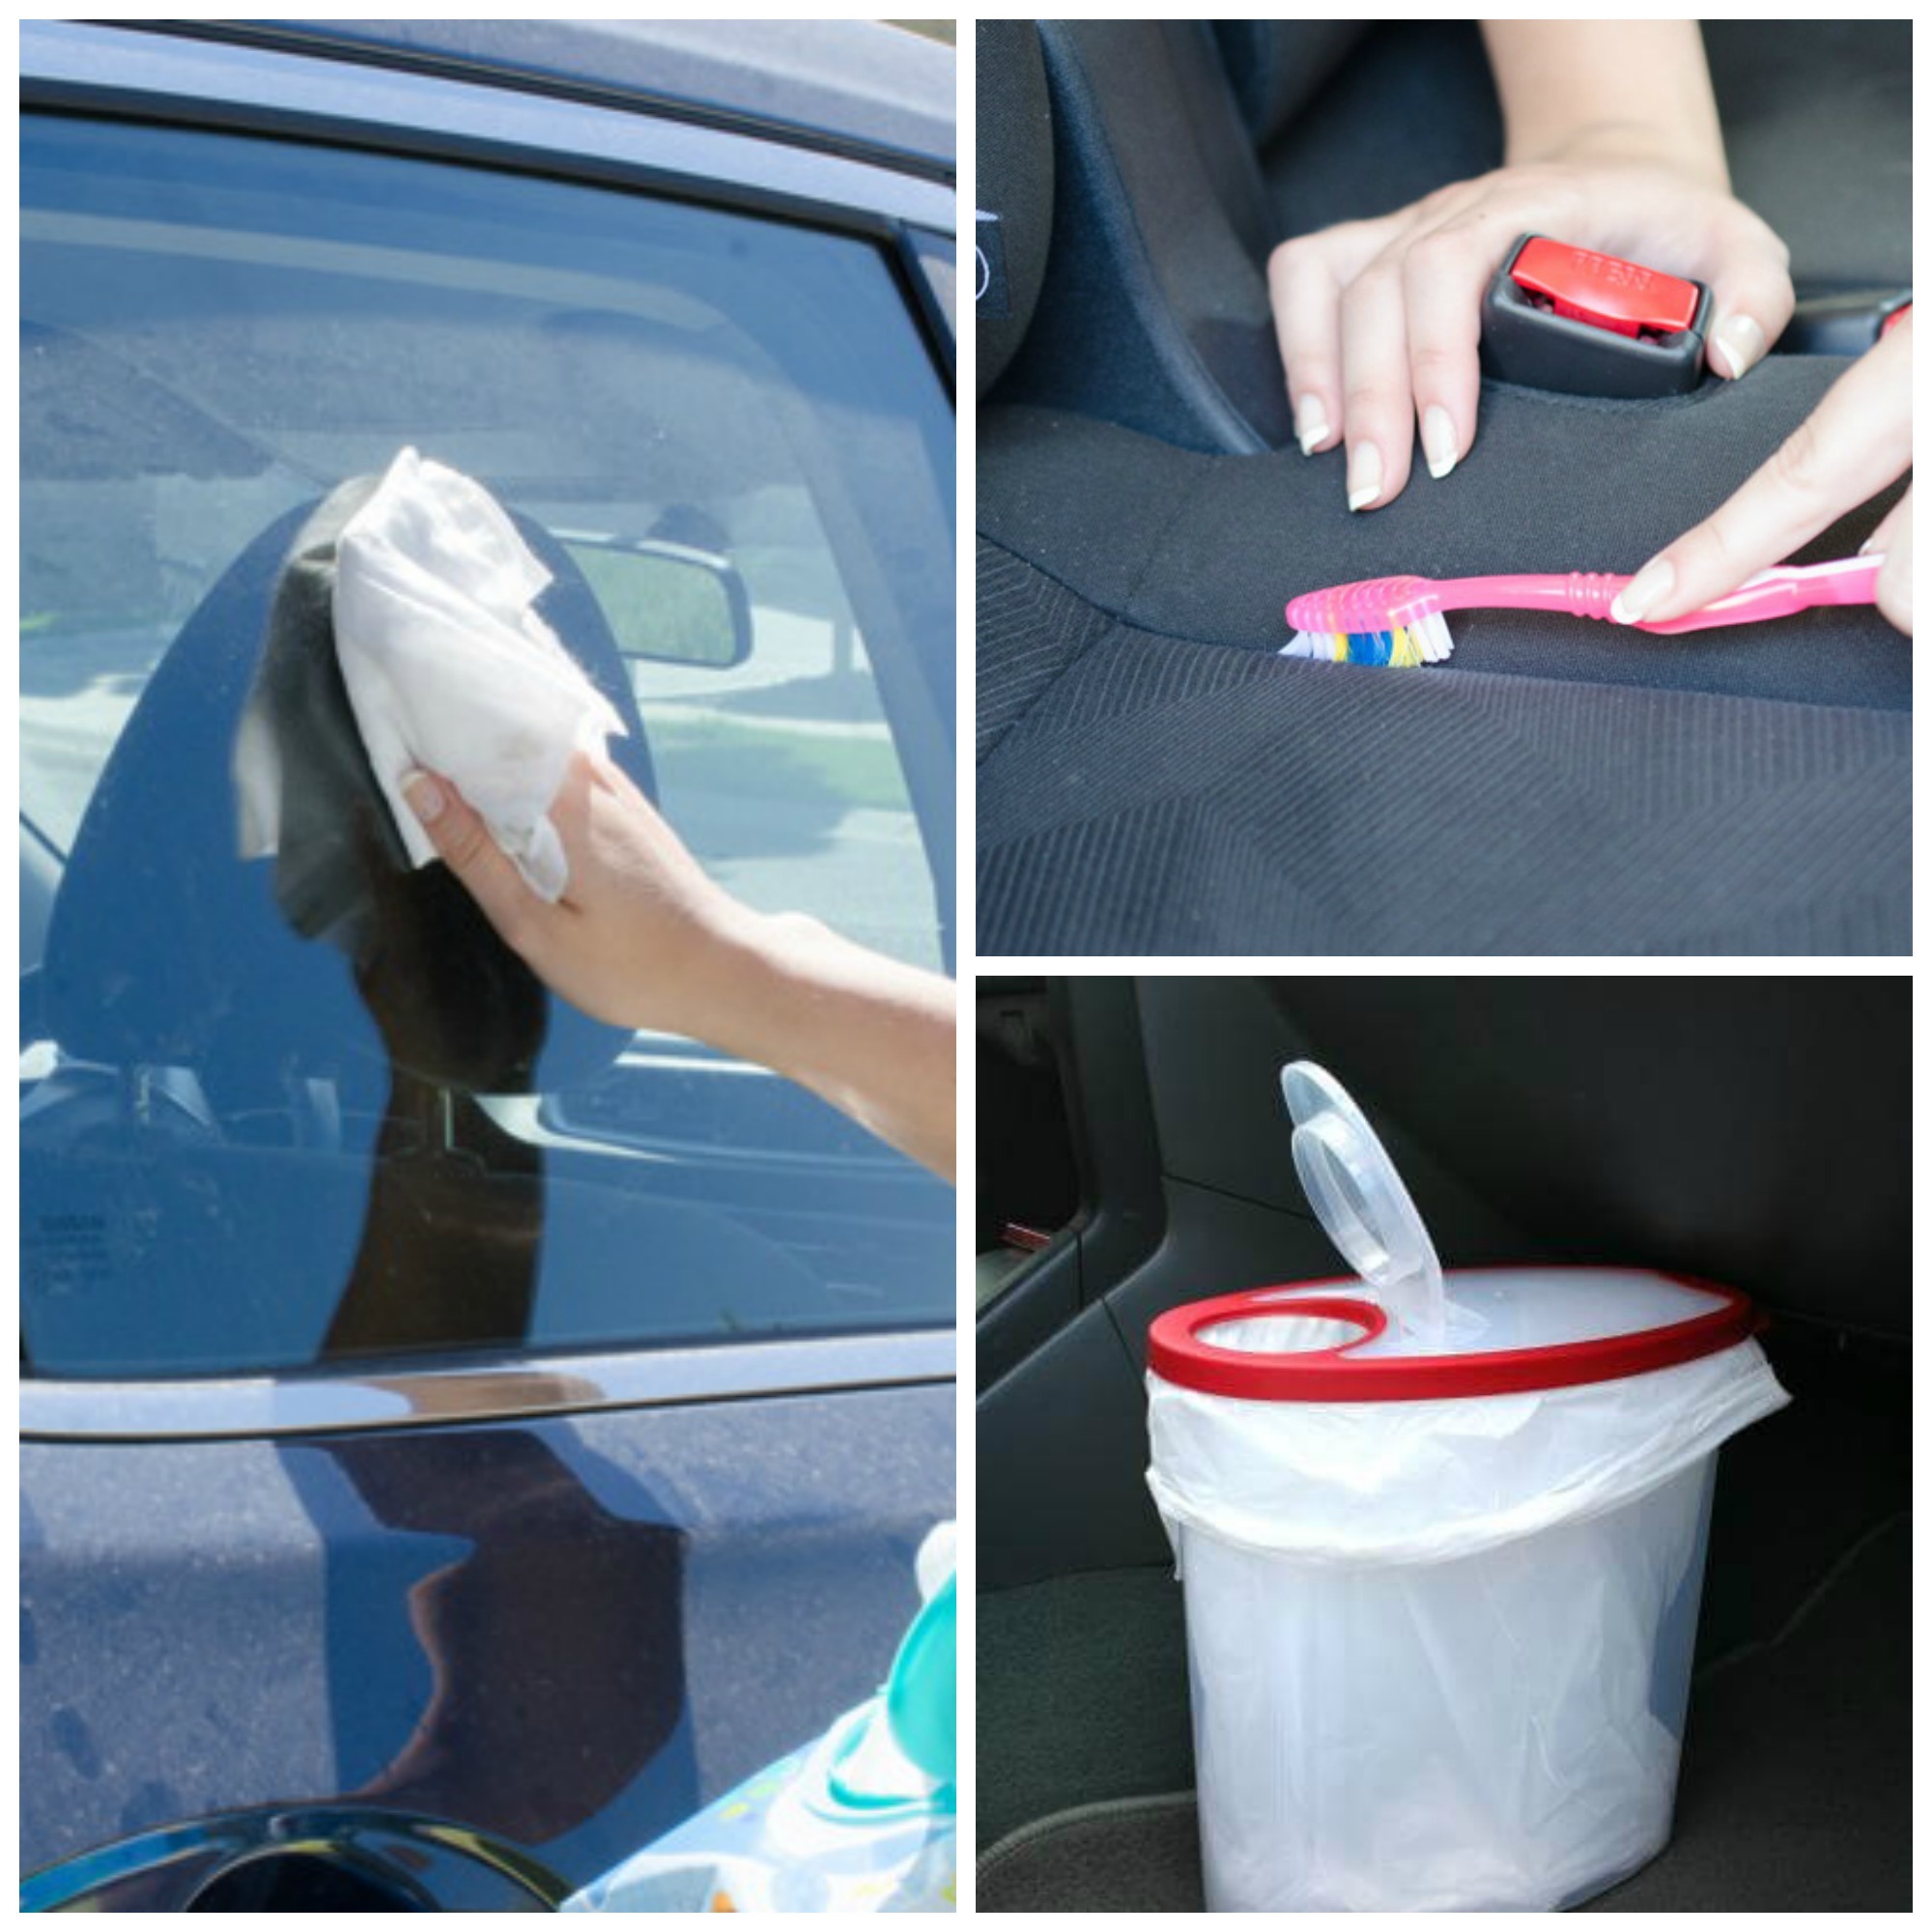 12 Genius Car Hacks That You Can't Live Without 1